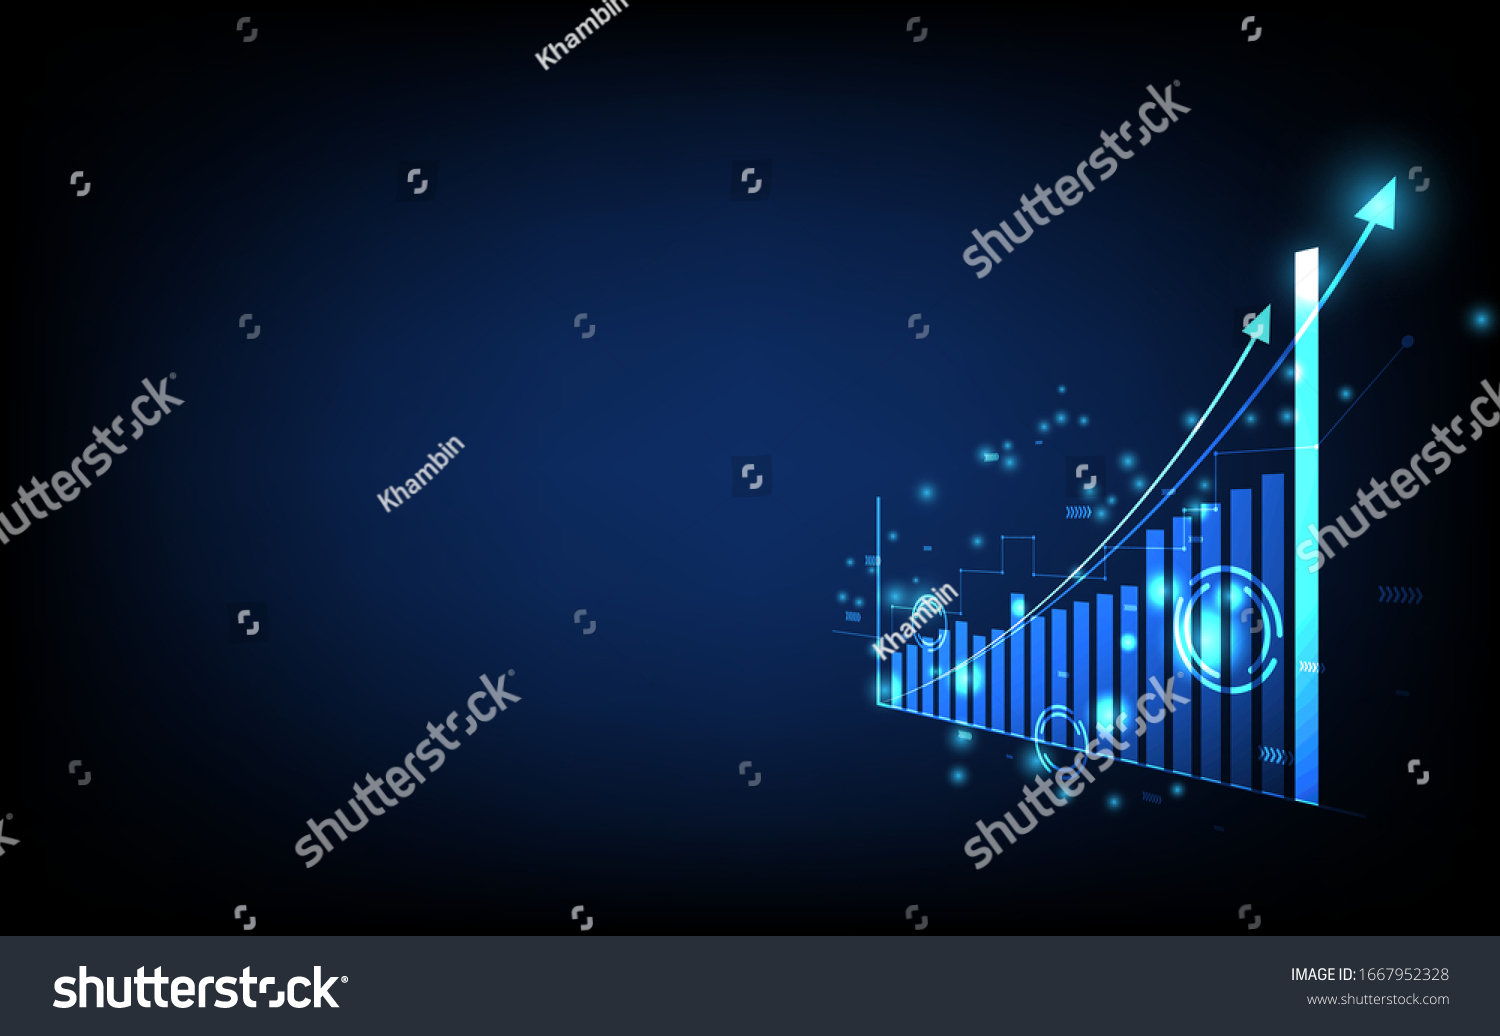 SVG of technology business background, graph financial with social network diagram concept, futuristic digital innovation background vector illustration svg